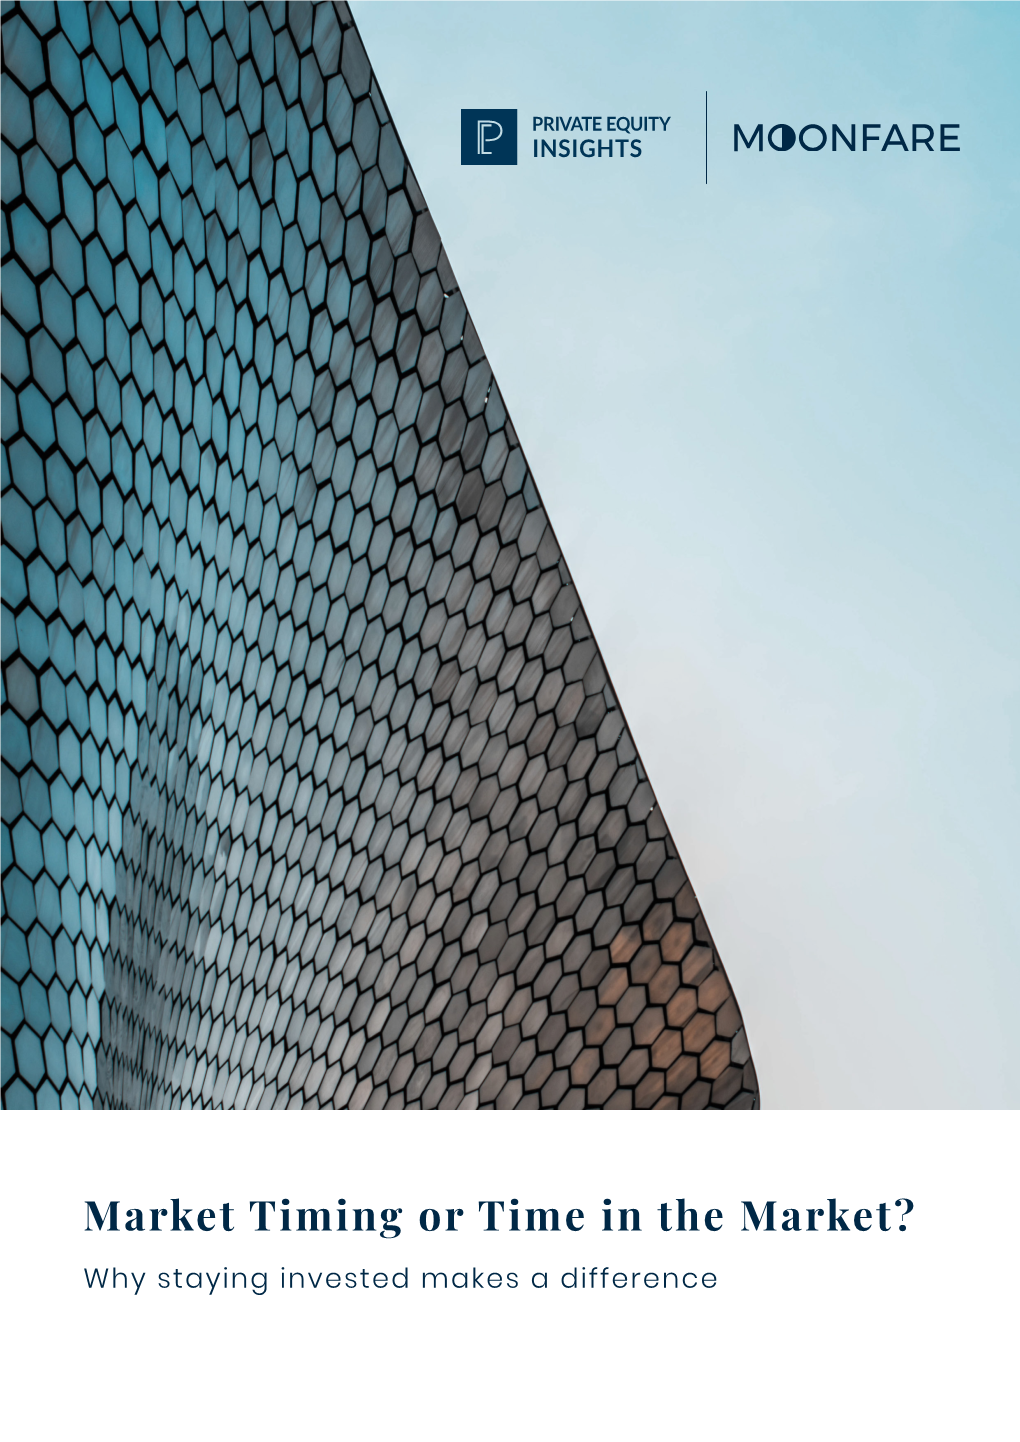 Market Timing Or Time in the Market?